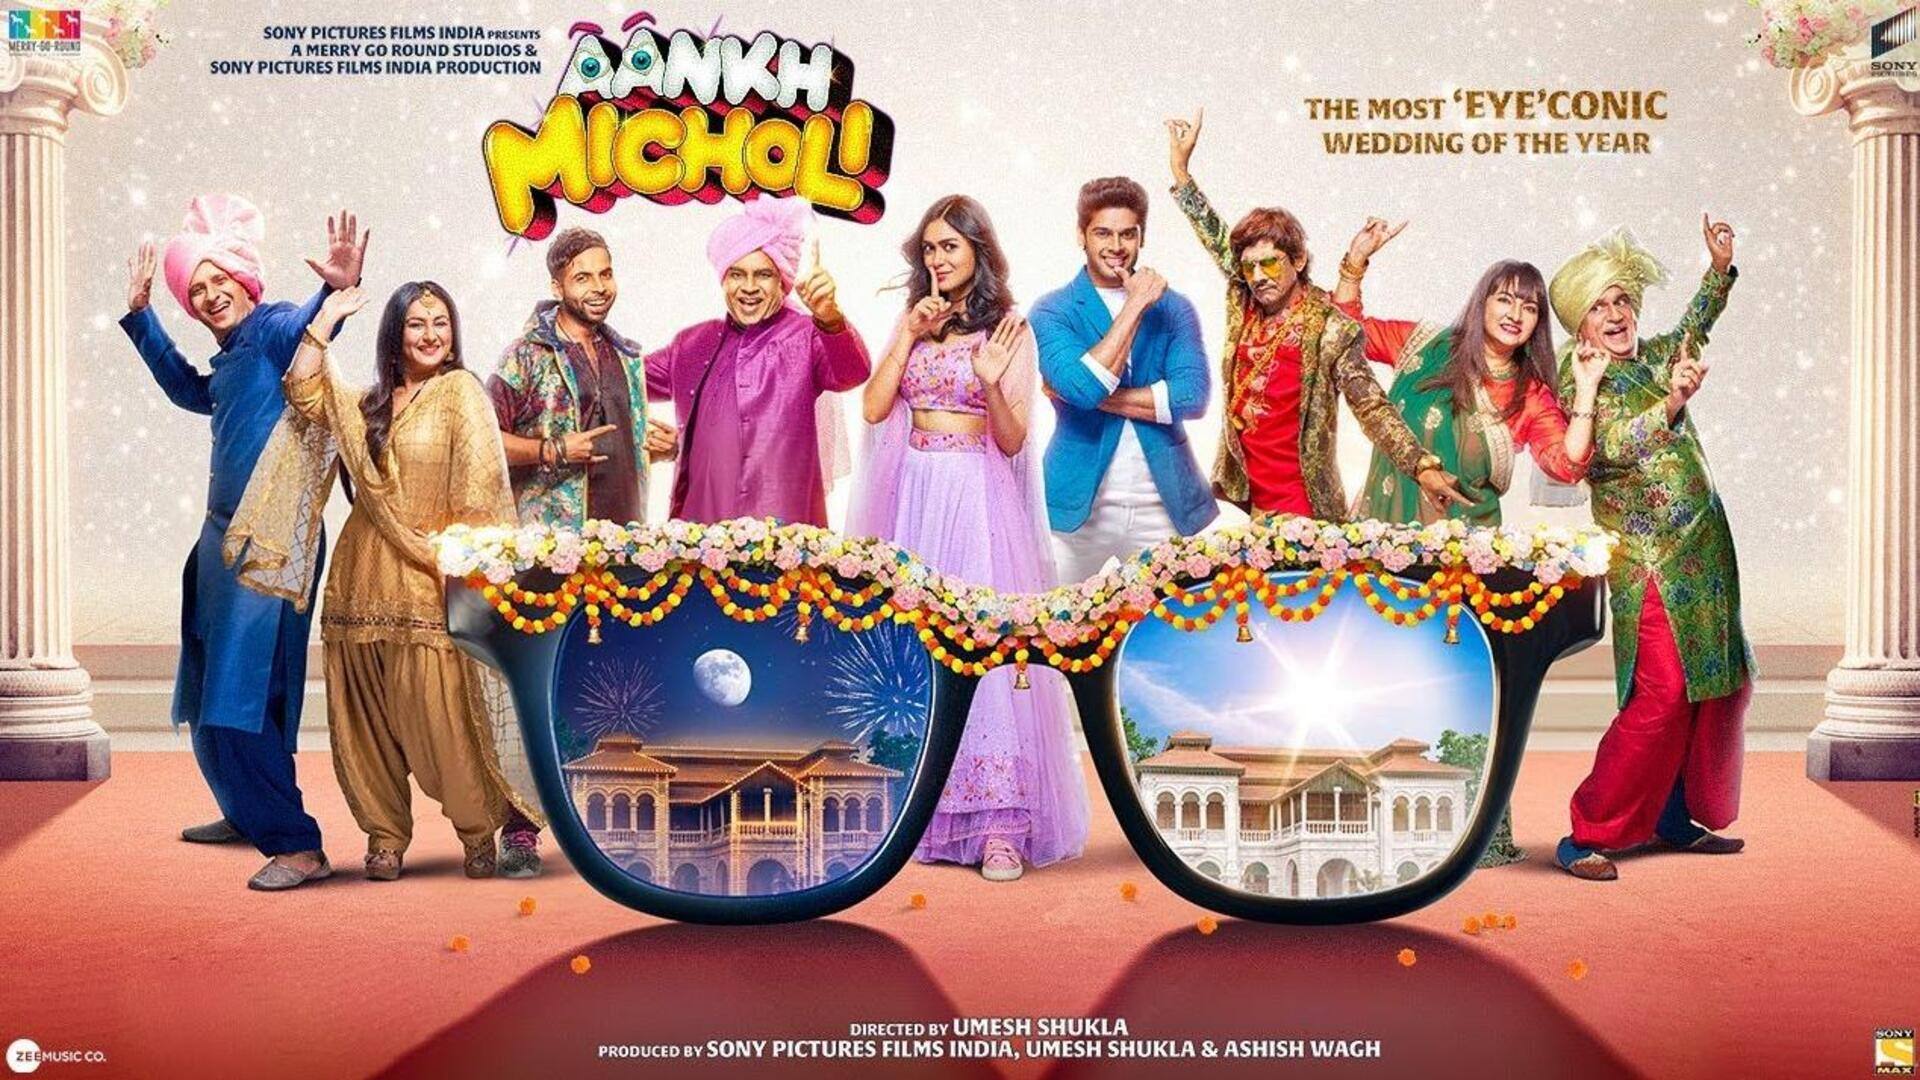 Box office collection: 'Aankh Micholi' to exit theaters soon